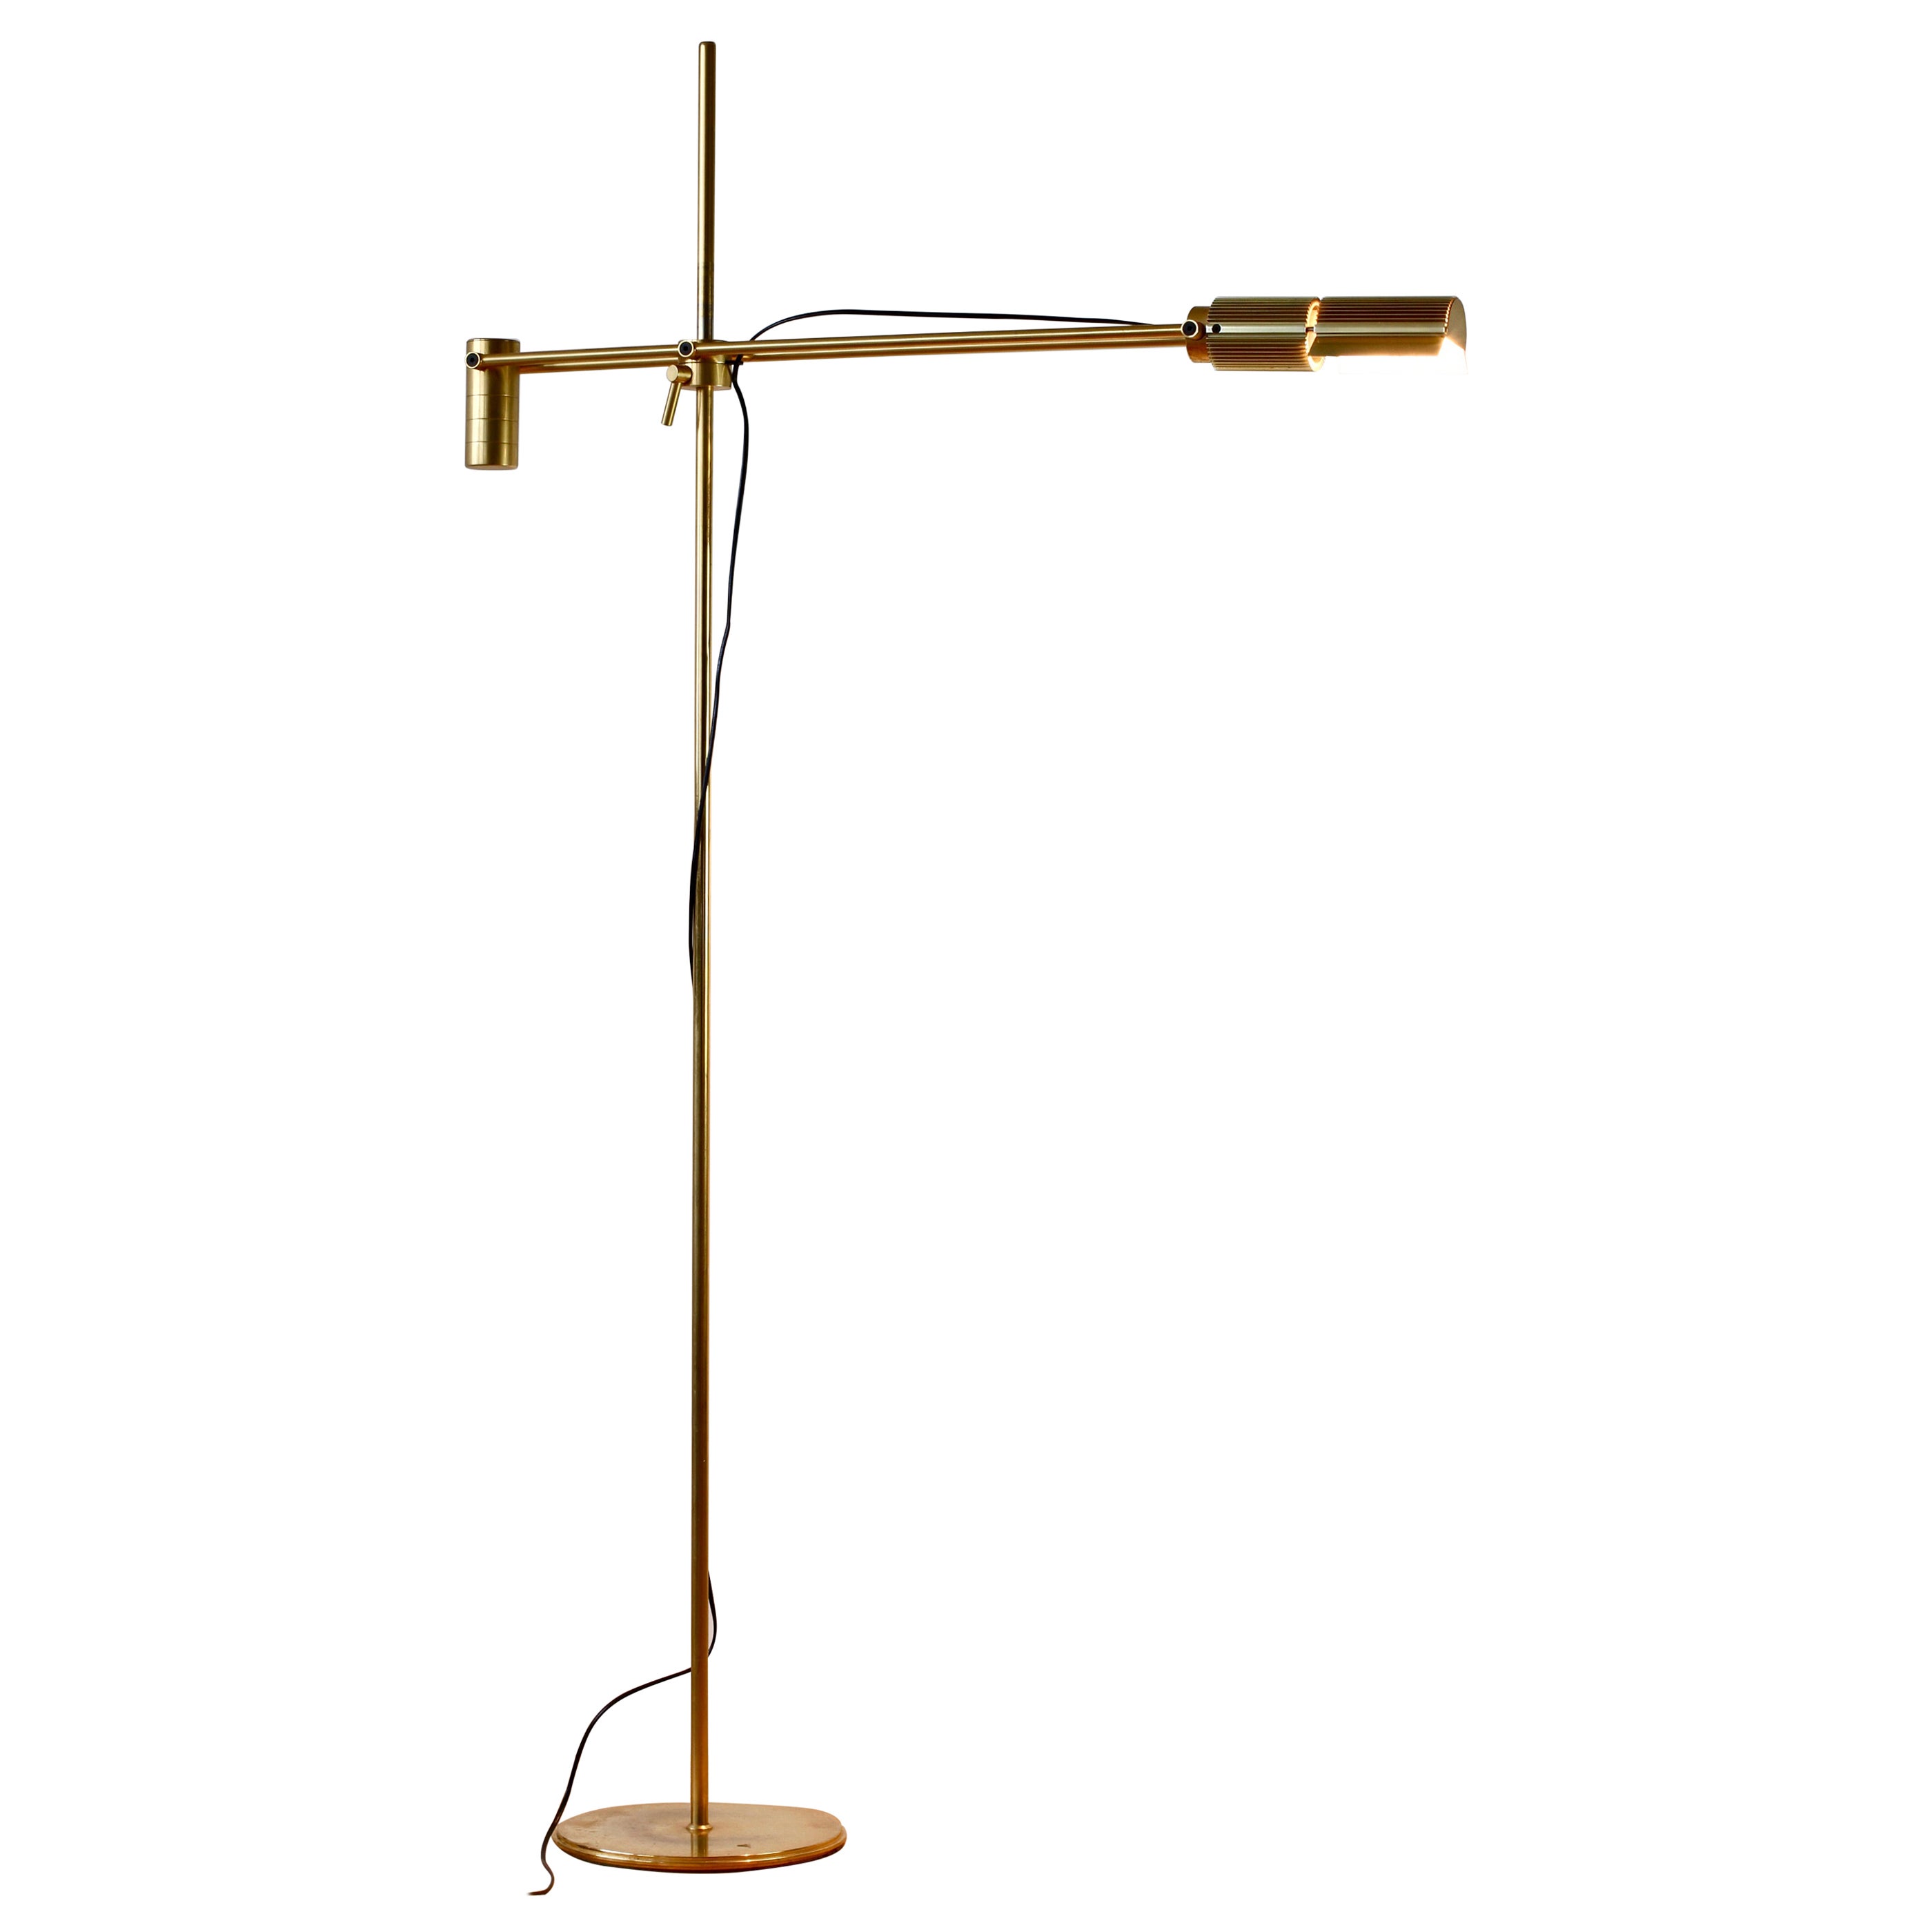 Italian Gold Plated Vintage Modernist Brass 1980s Adjustable Floor Lamp by Relco